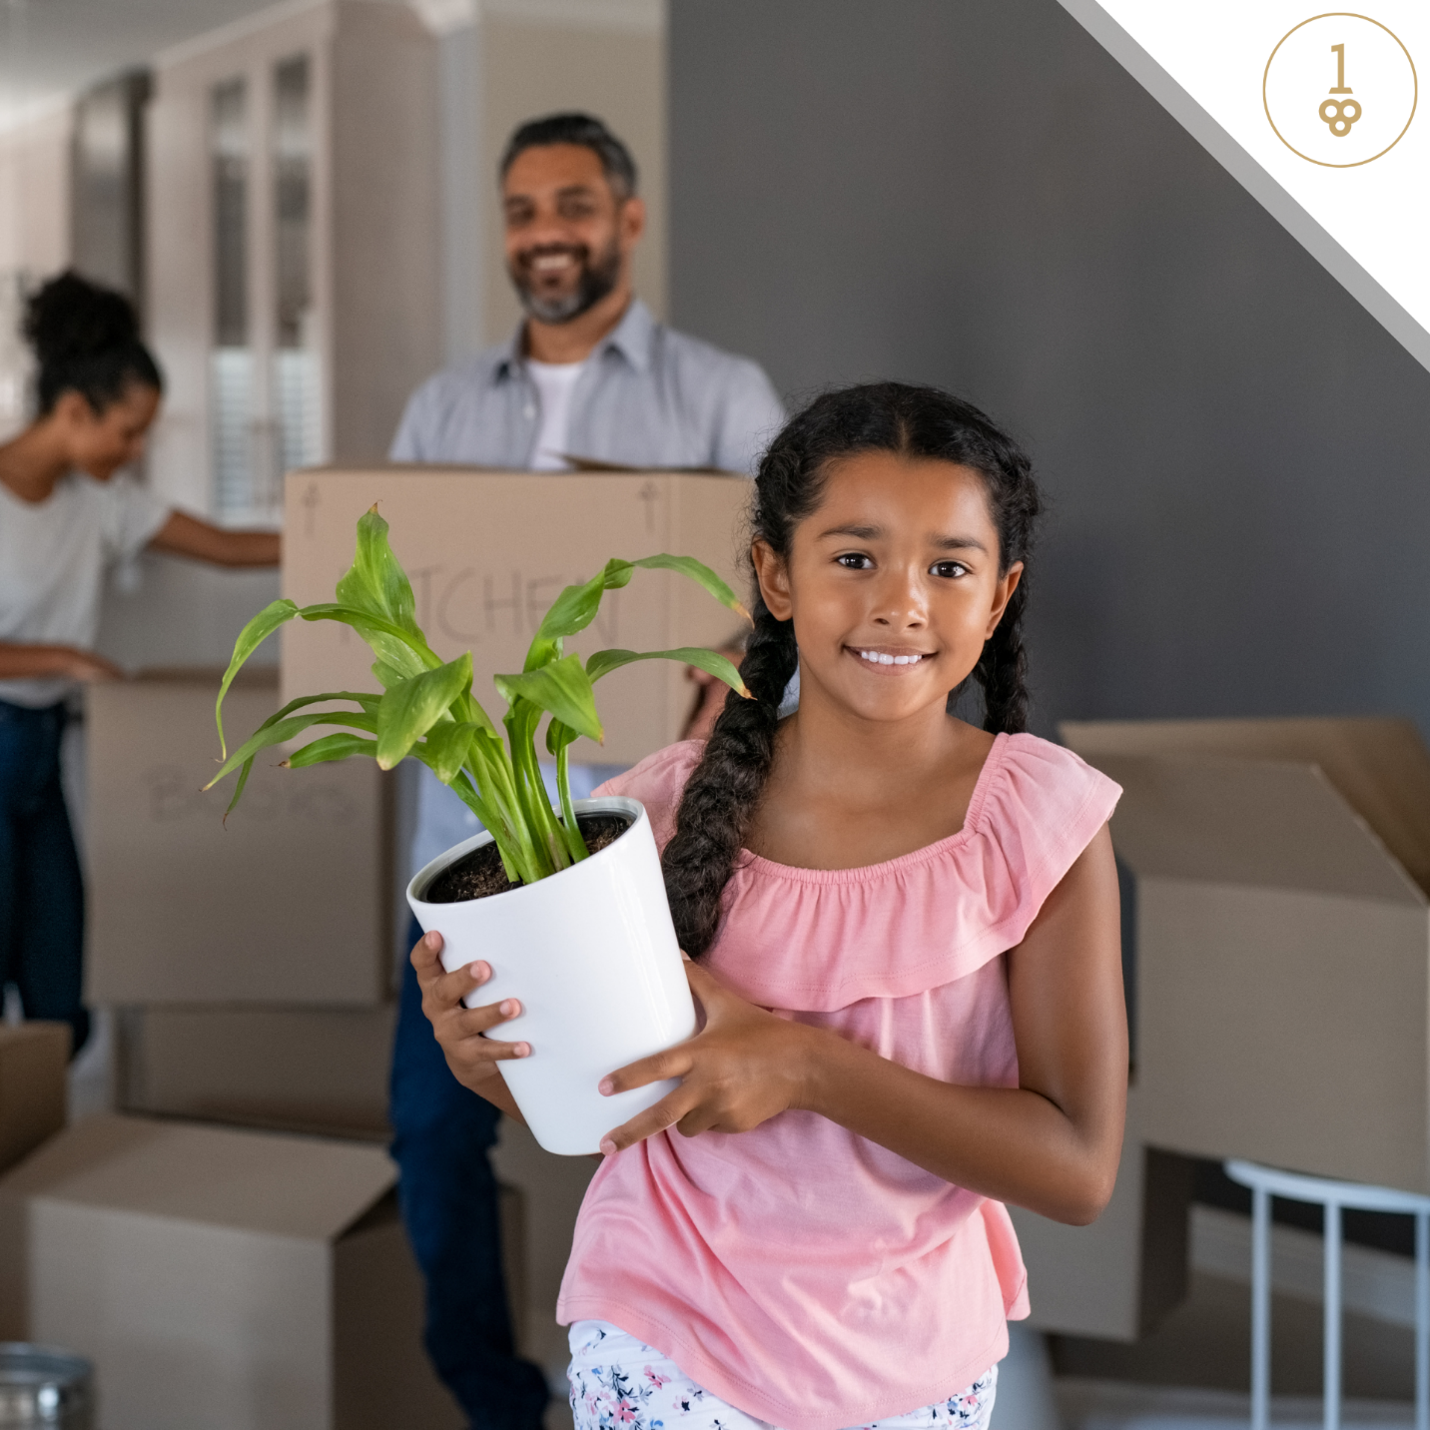 A little girl is holding a potted plant in a new home.